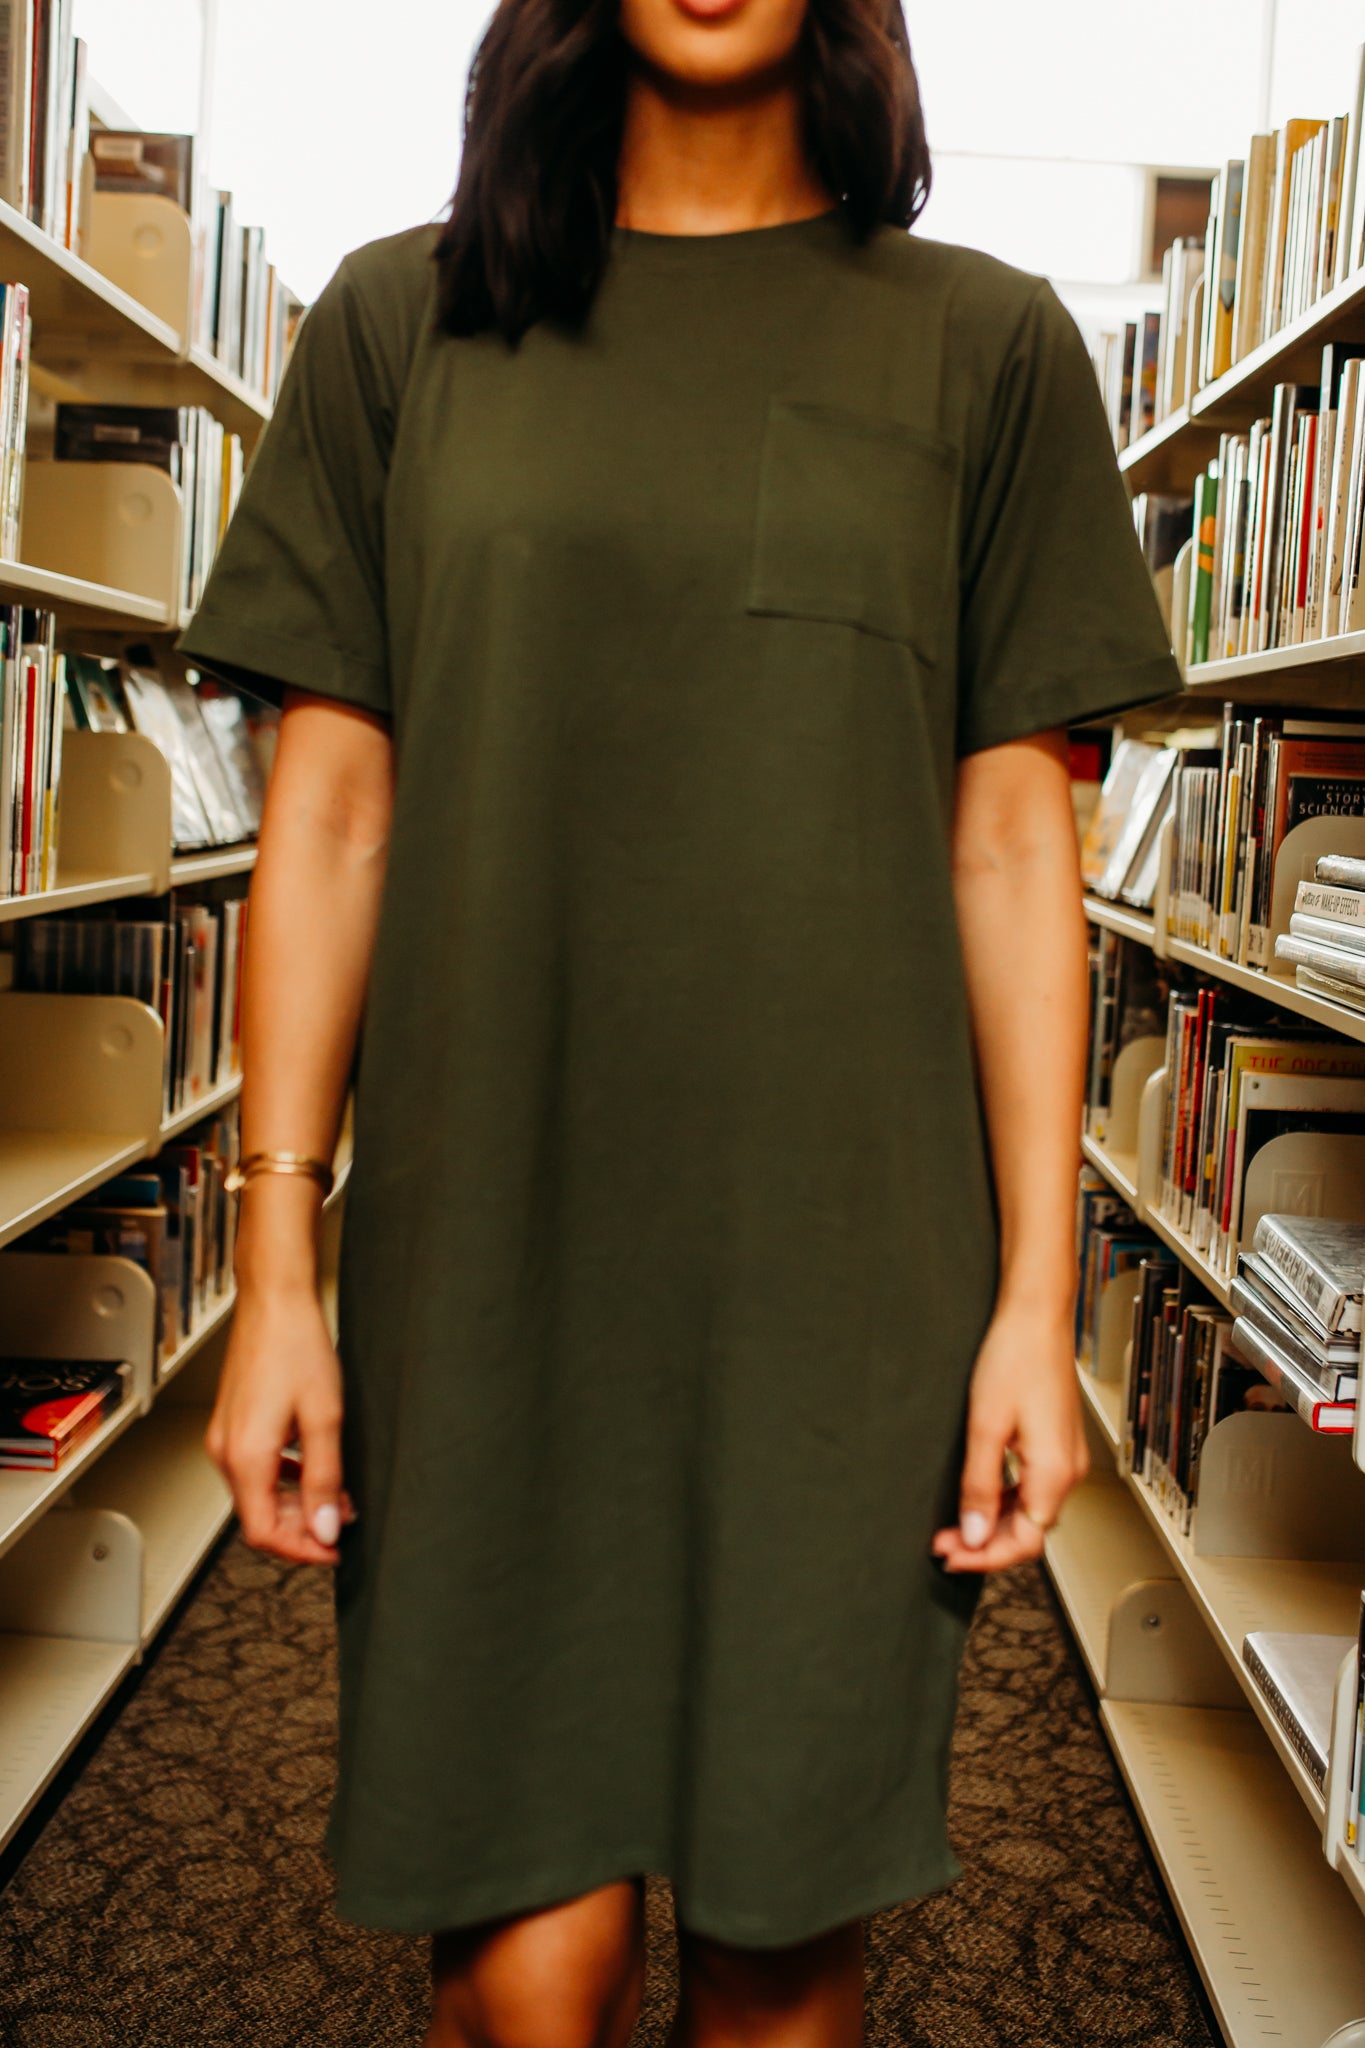 THE EASY DOES IT POCKET T-SHIRT DRESS BY PINK DESERT IN OLIVE